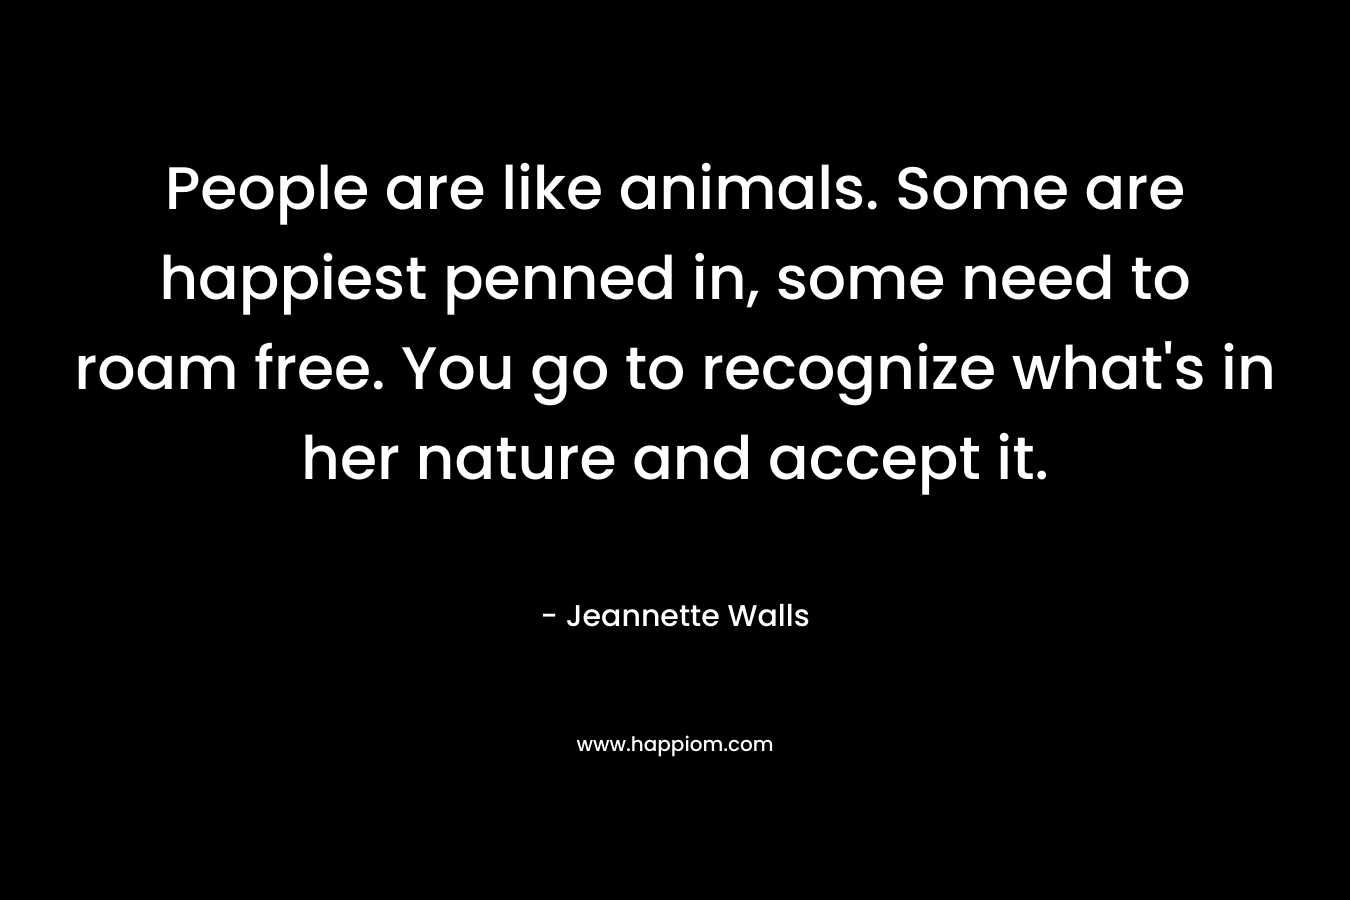 People are like animals. Some are happiest penned in, some need to roam free. You go to recognize what's in her nature and accept it.